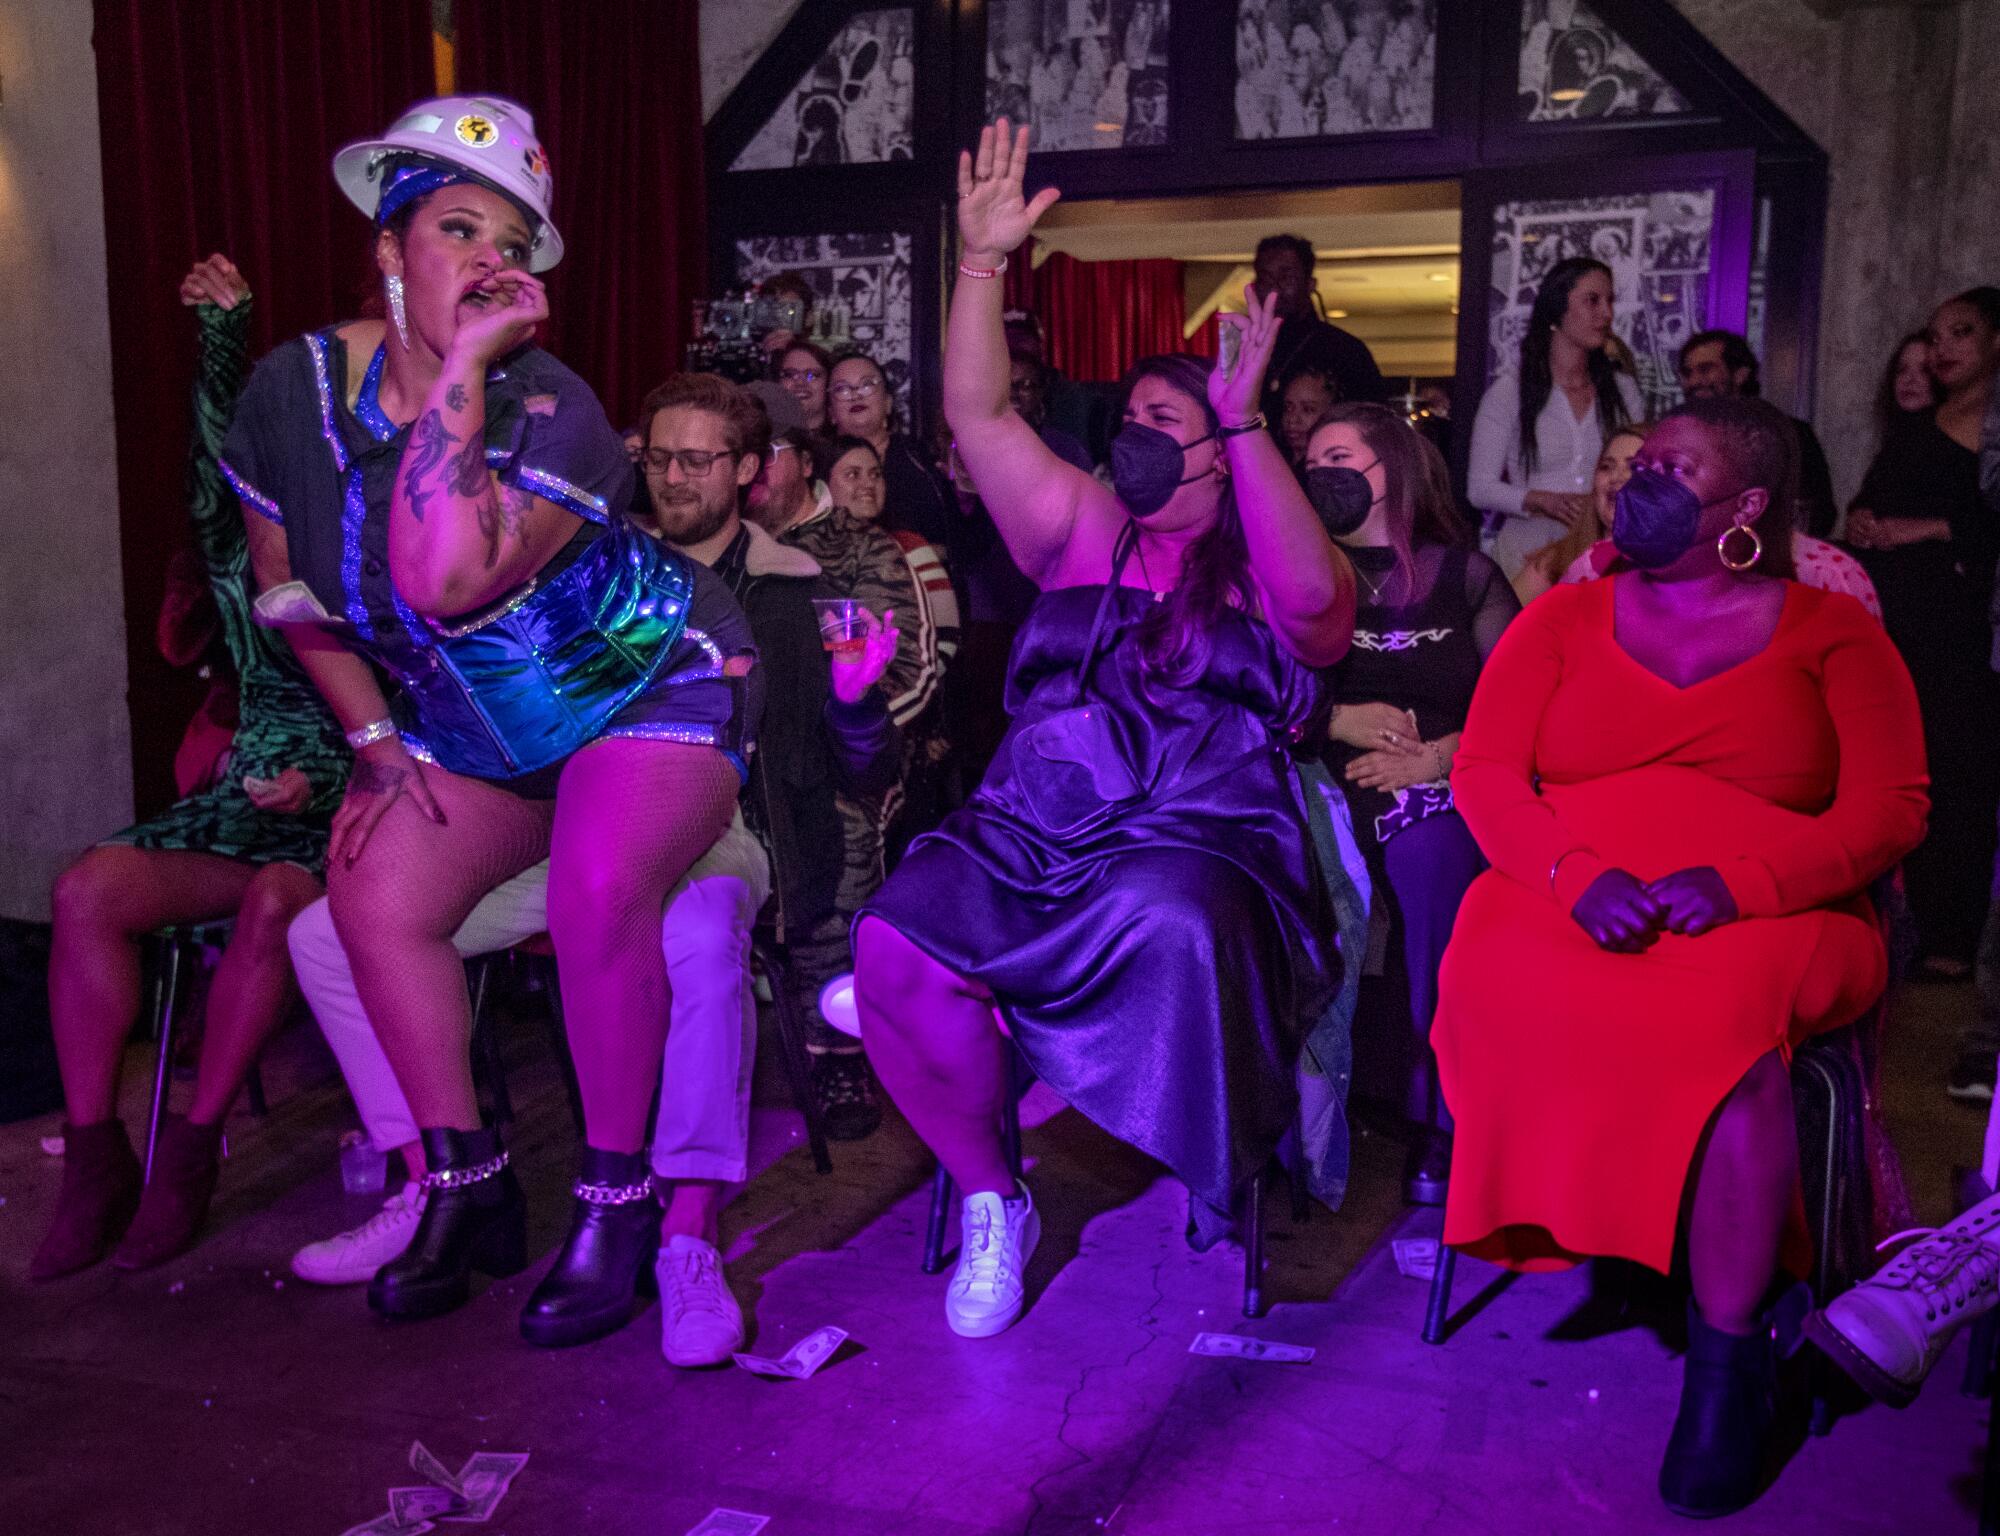 A burlesque dancer in a hard hat backs up to a cheering audience member.